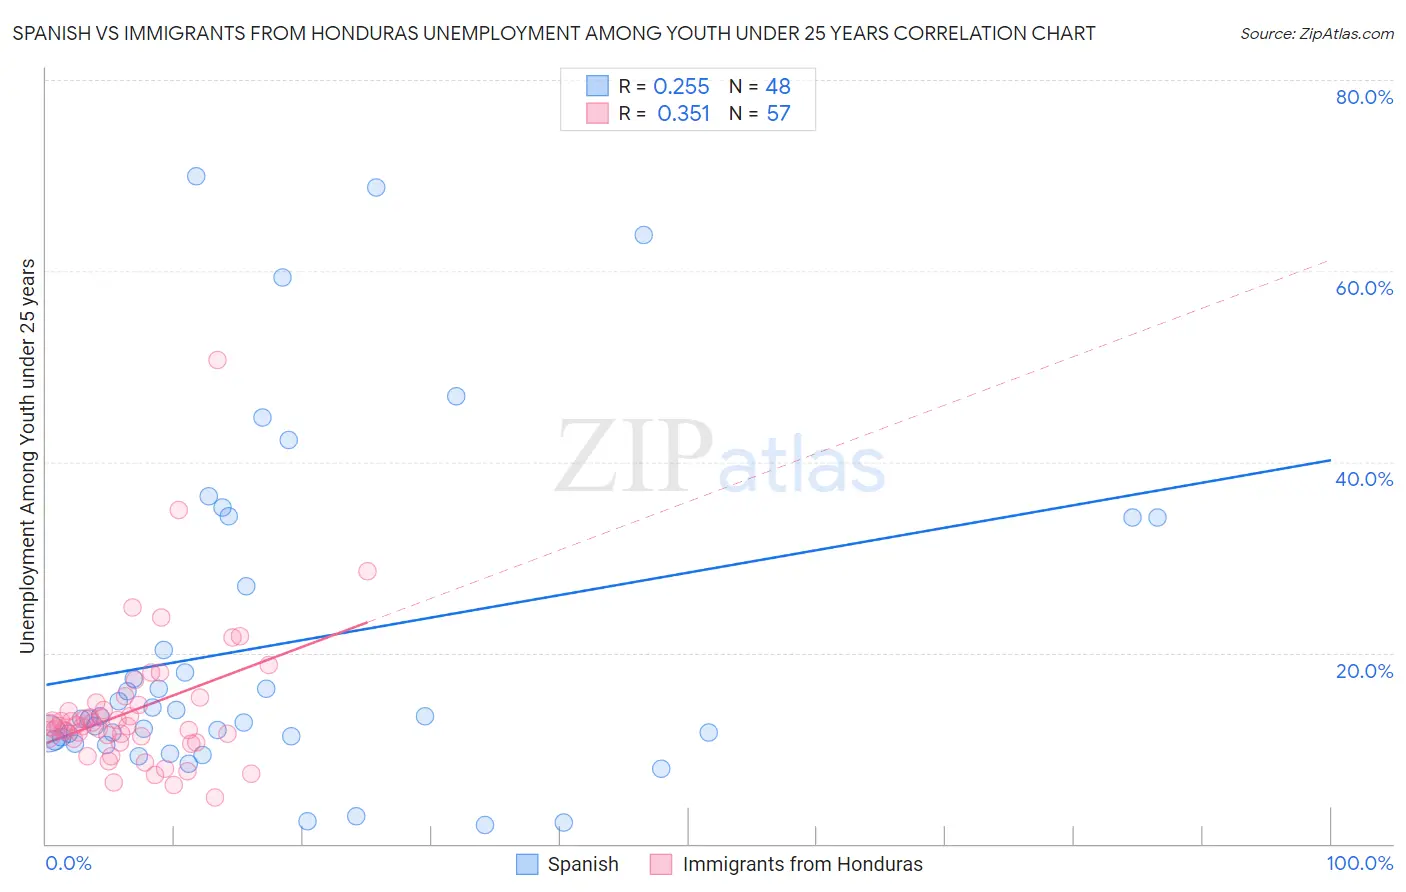 Spanish vs Immigrants from Honduras Unemployment Among Youth under 25 years